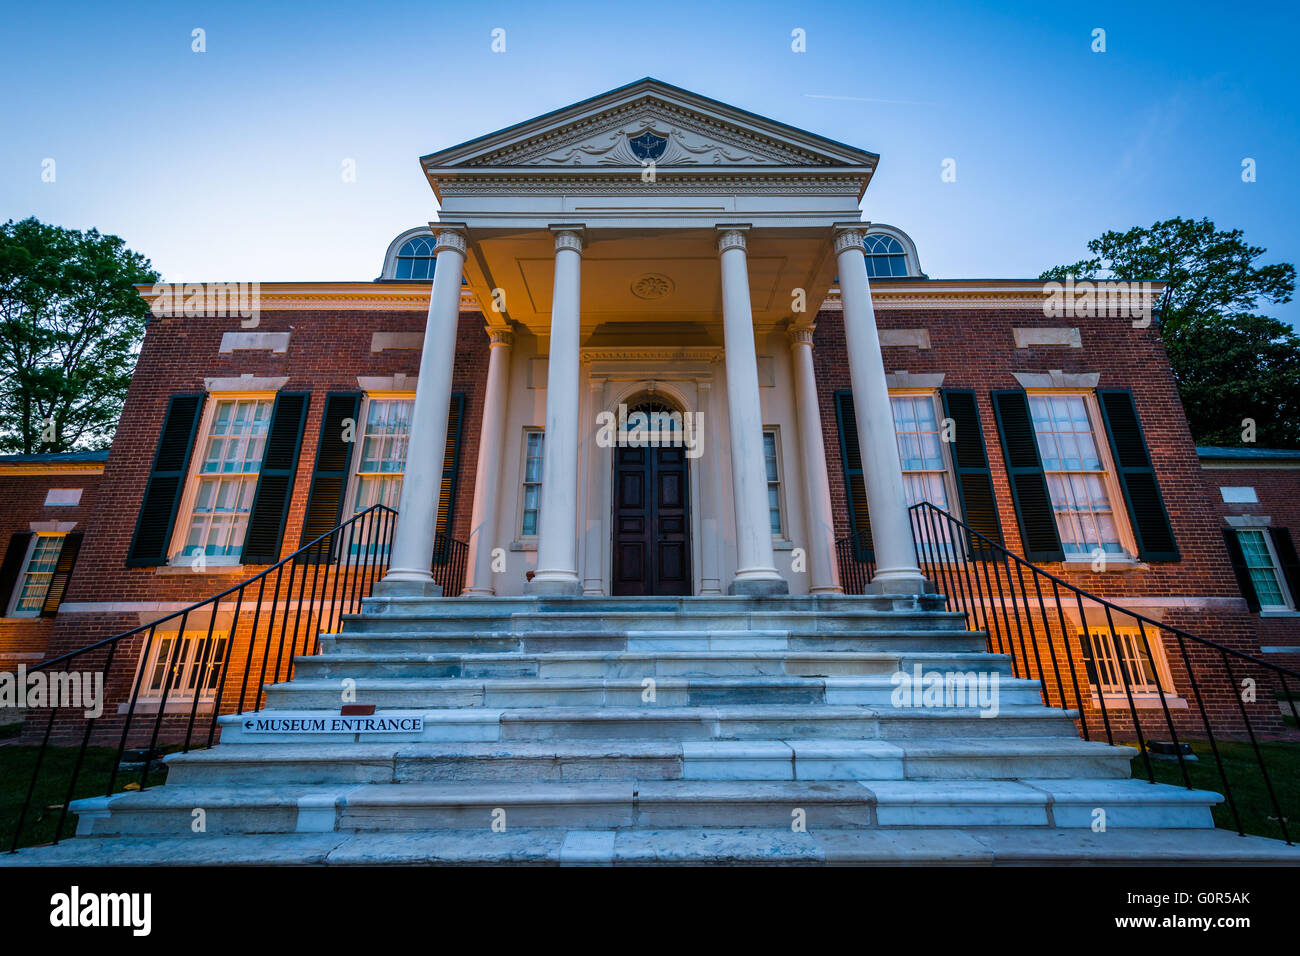 The Homewood Museum at Johns Hopkins University, in Baltimore, Maryland. Stock Photo